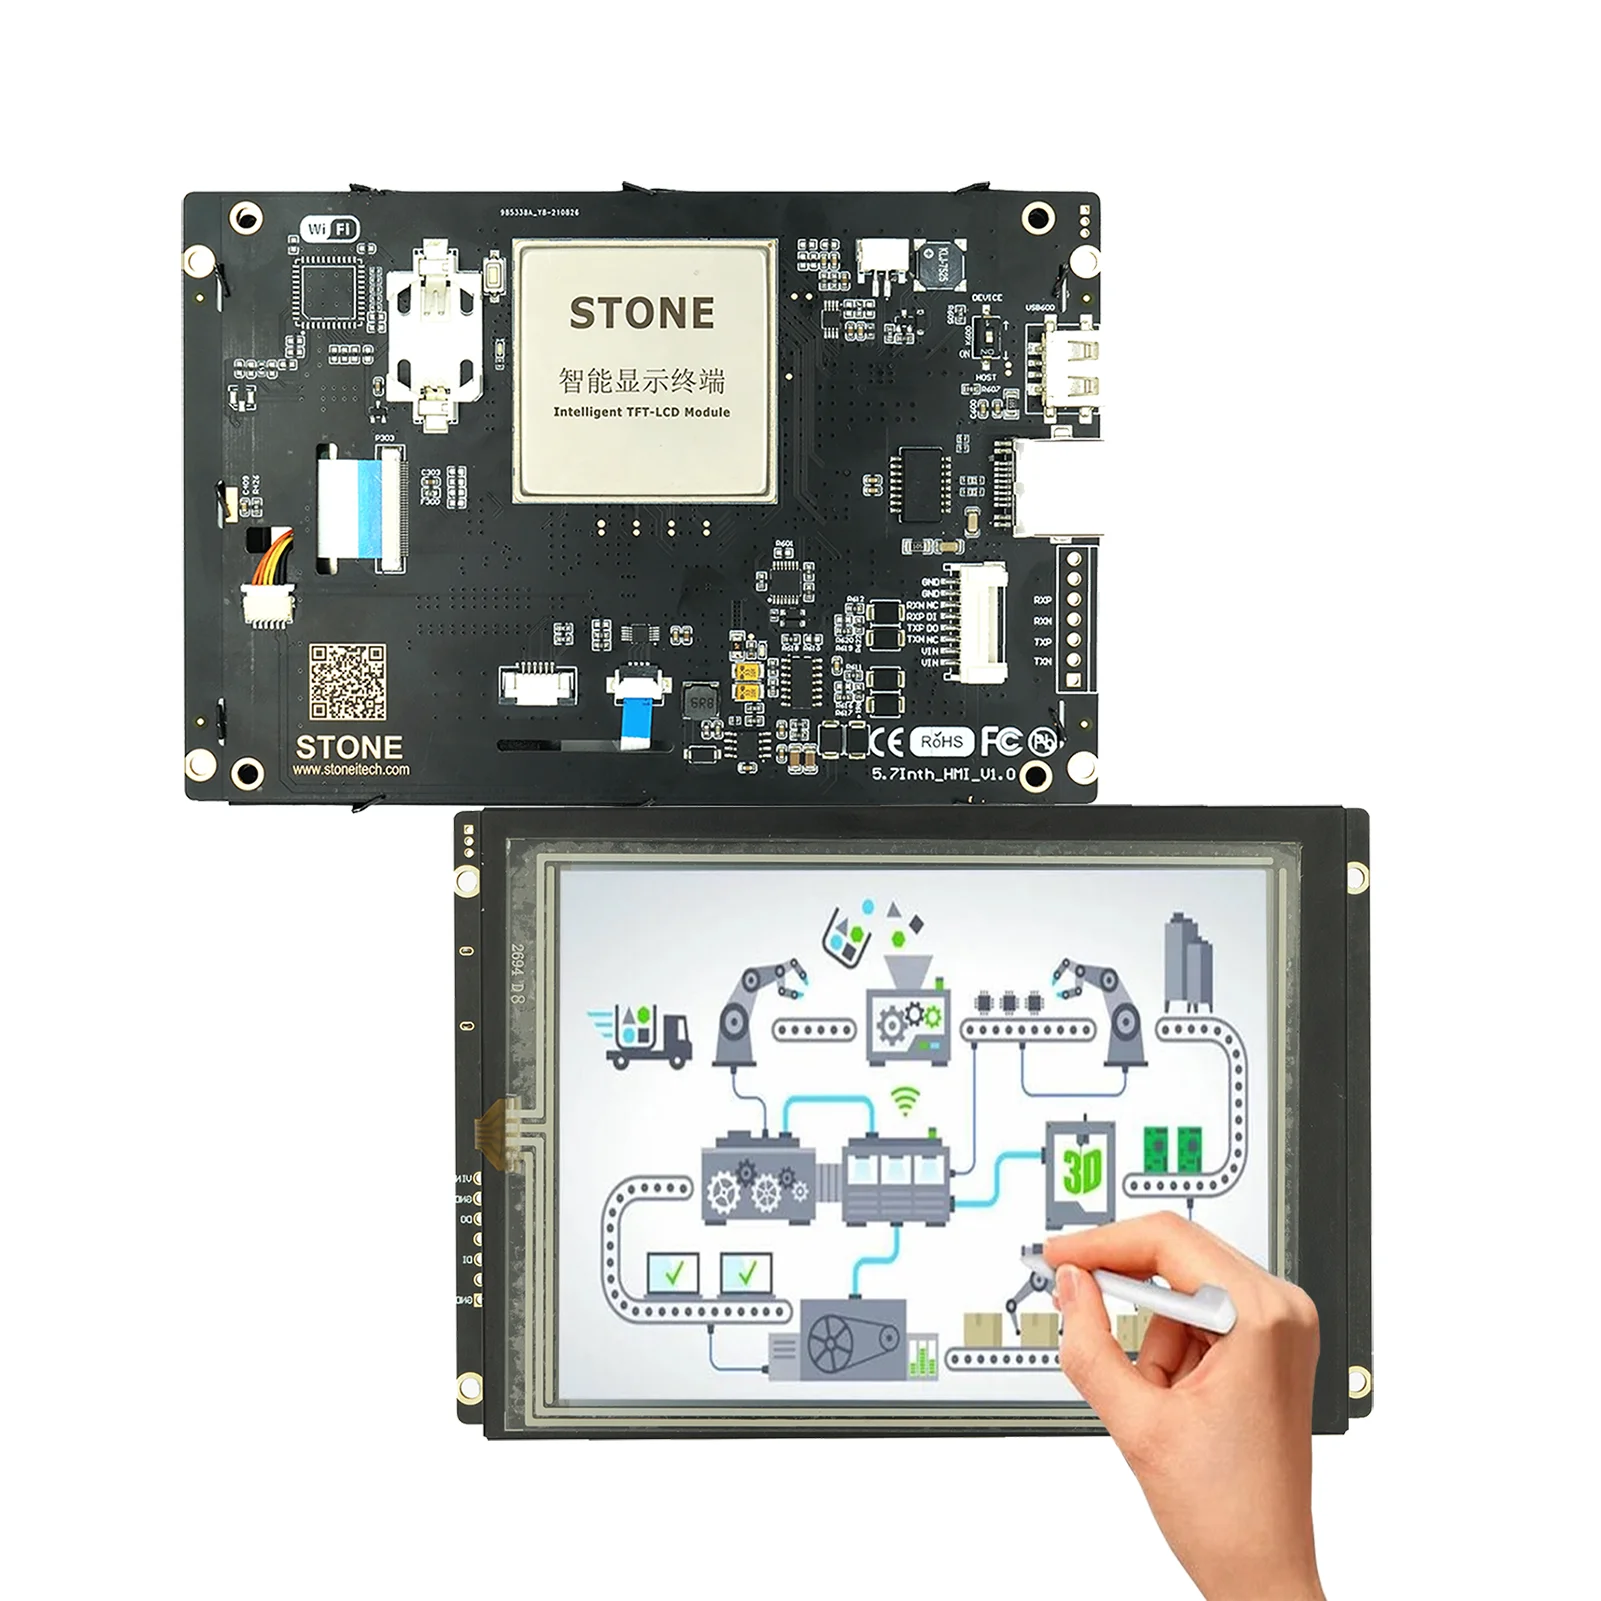 STONE Enhanced Series HMI Graphic LCD Display Module  with Touch Panel